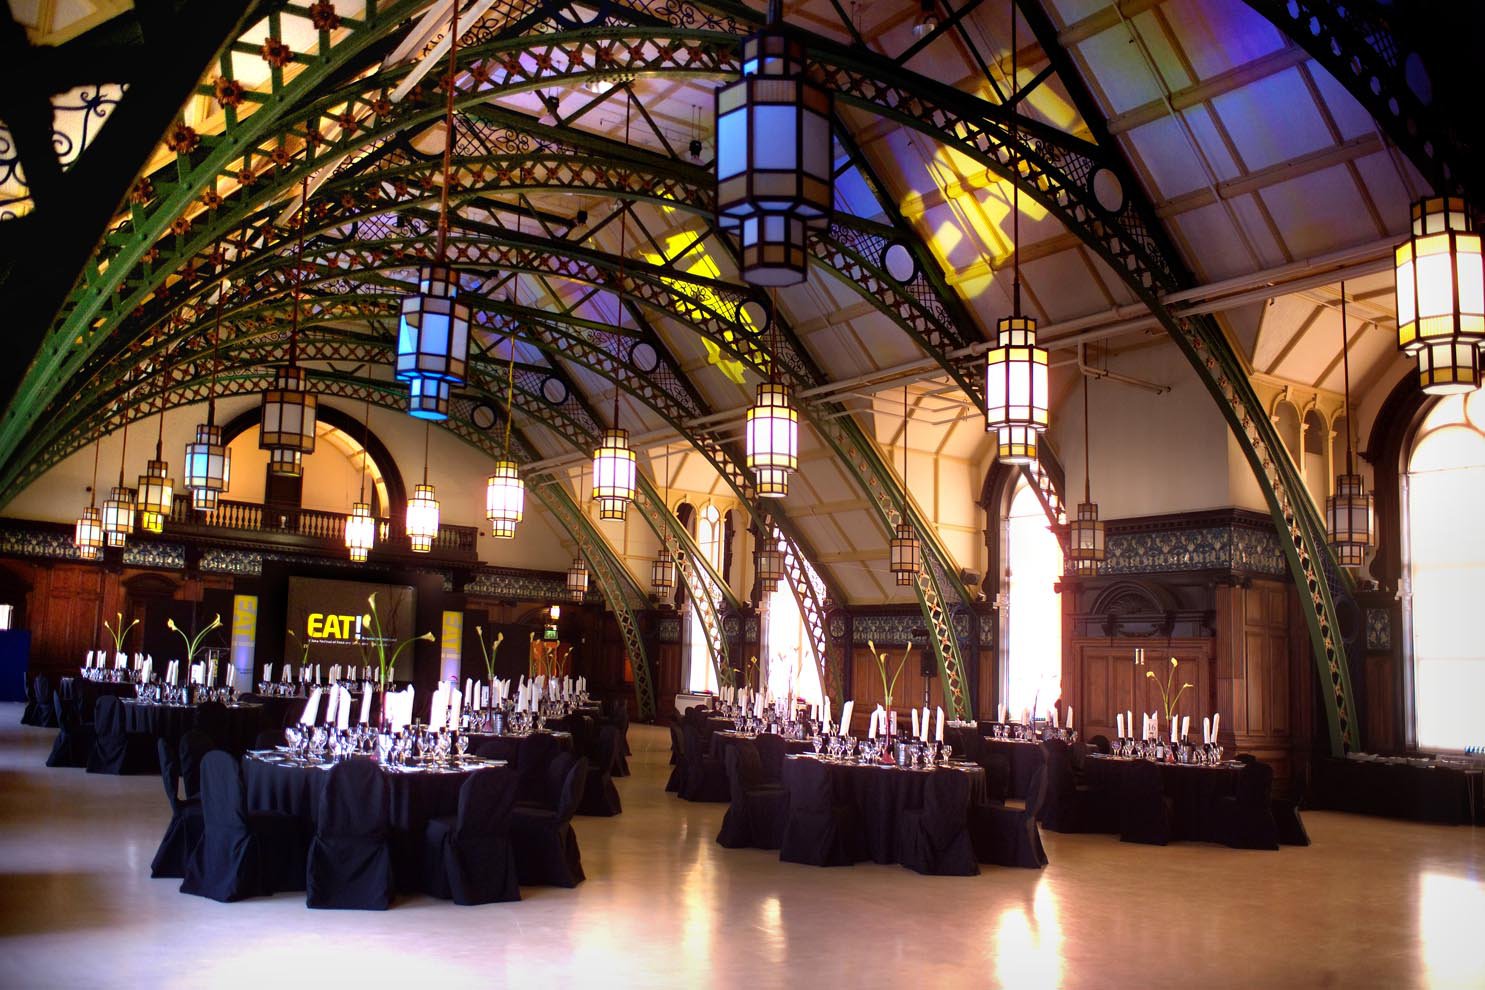 Photo: The magnificent Great Hall set up for an event.